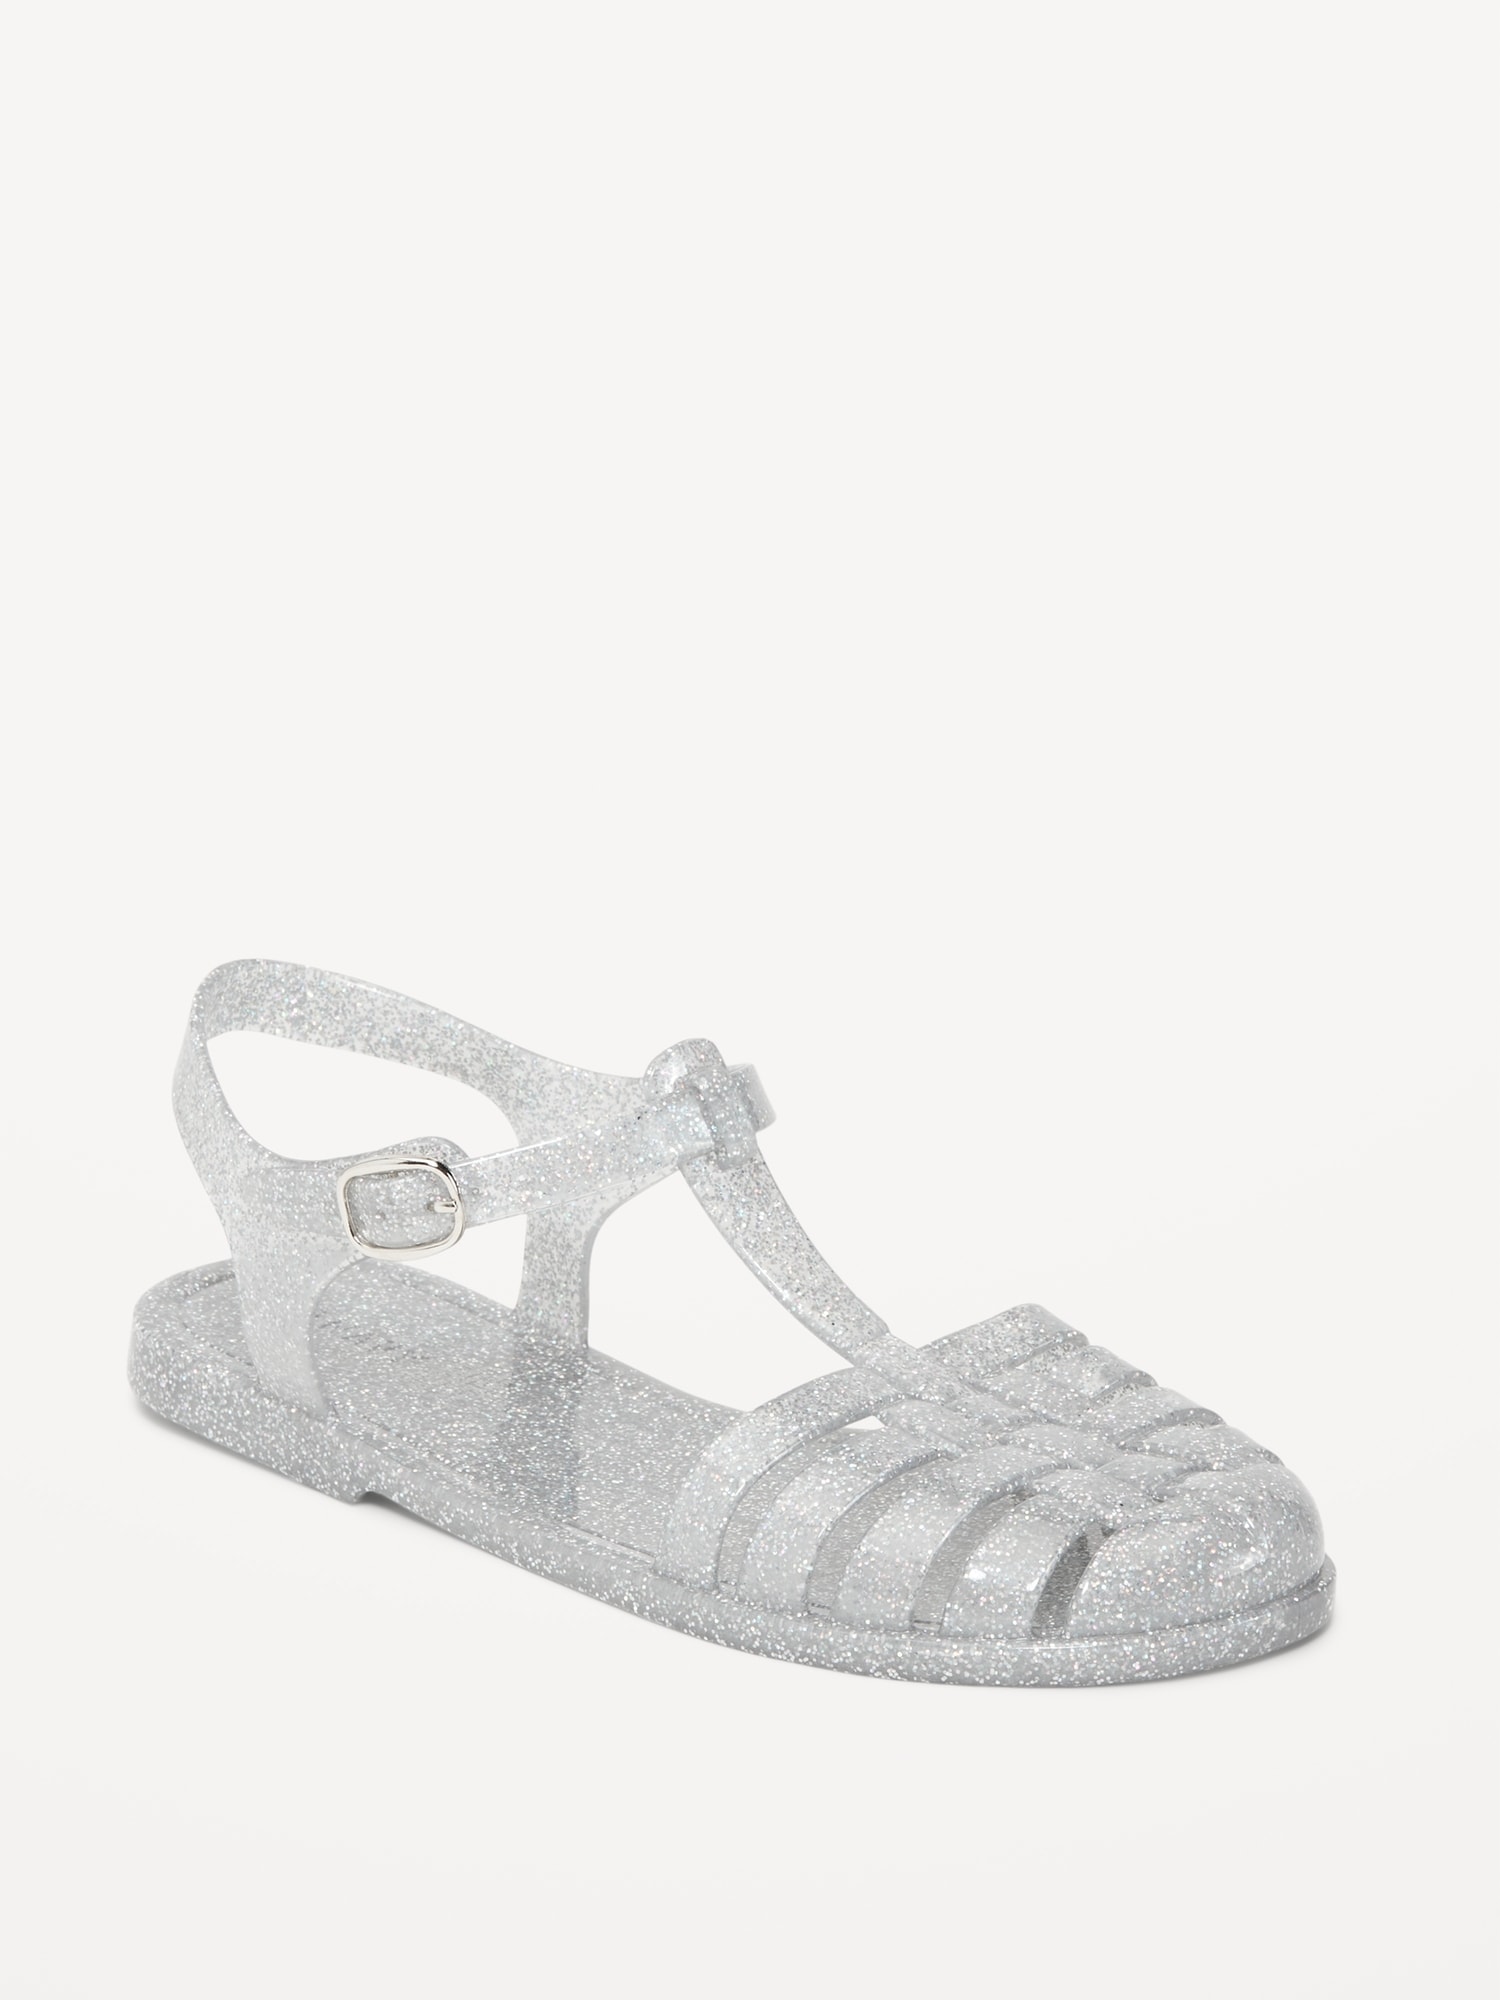 Old Navy Shiny-Jelly Fisherman Sandals for Girls silver. 1